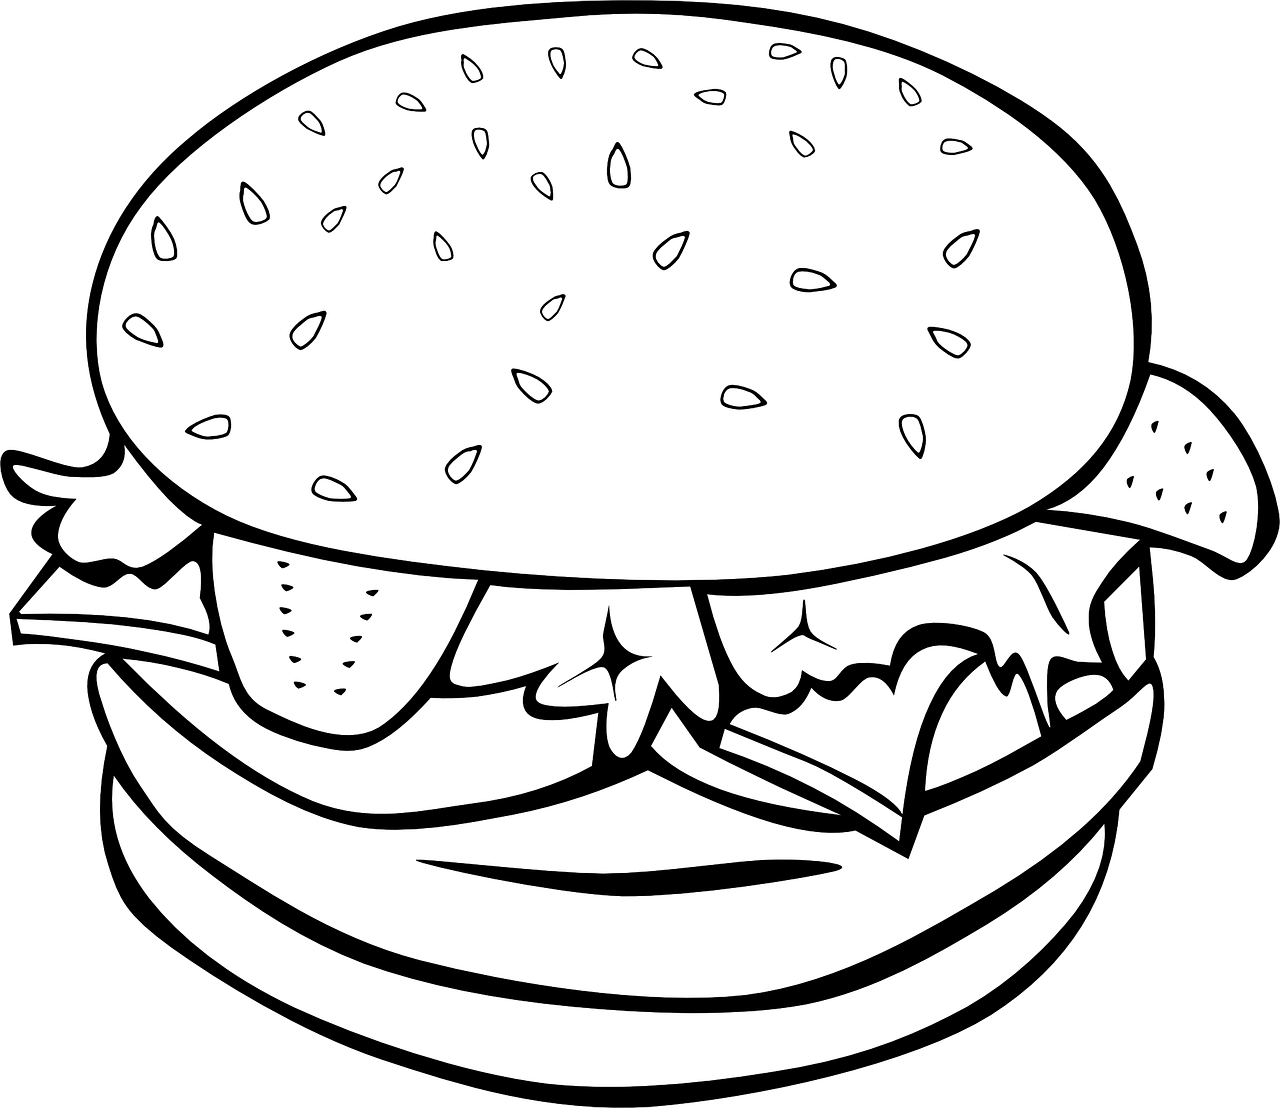 hamburger,burger,sandwich,bread,lettuce,tomato,snack,lunch,fast,food,sesame,seeds,free vector graphics,free pictures, free photos, free images, royalty free, free illustrations, public domain